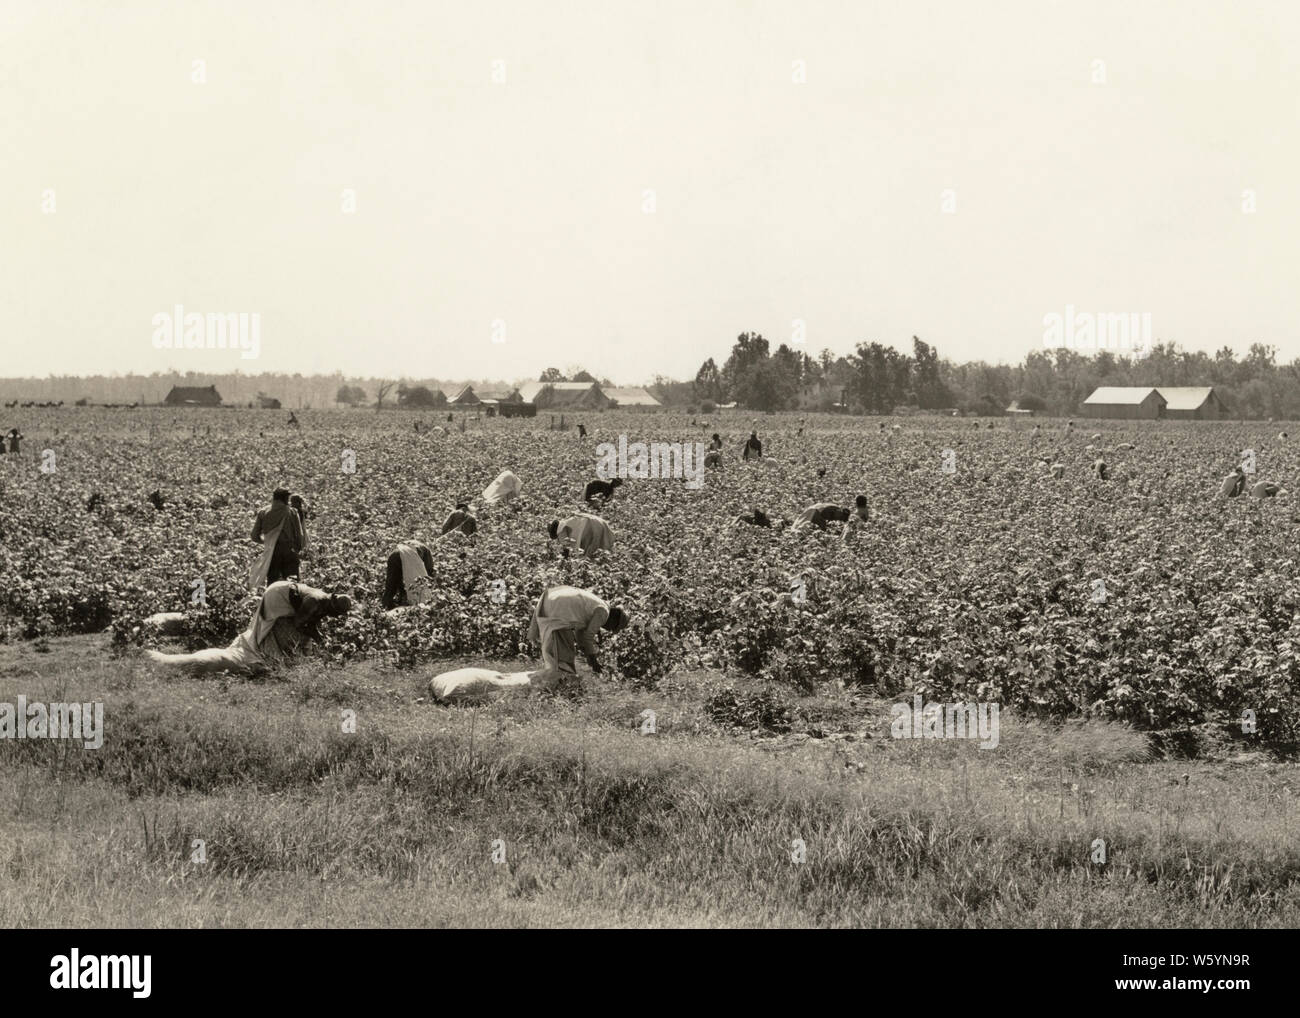 1930s NUMBER OF AFRICAN AMERICAN MEN AND WOMEN WORKERS PICKING COTTON IN LARGE FARM FIELD NEAR MEMPHIS TENNESSEE USA - c7910 HAR001 HARS NORTH AMERICA NORTH AMERICAN SKILL OCCUPATION SKILLS TN STRENGTH COURAGE AND NUMBER CAREERS LABOR IN OF NEAR OCCUPATIONS MEMPHIS CONCEPTUAL SACKS STYLISH SUPPORT COOPERATION MID-ADULT MID-ADULT MAN MID-ADULT WOMAN TENNESSEE TOGETHERNESS BACKBREAKING BLACK AND WHITE HAR001 OLD FASHIONED Stock Photo